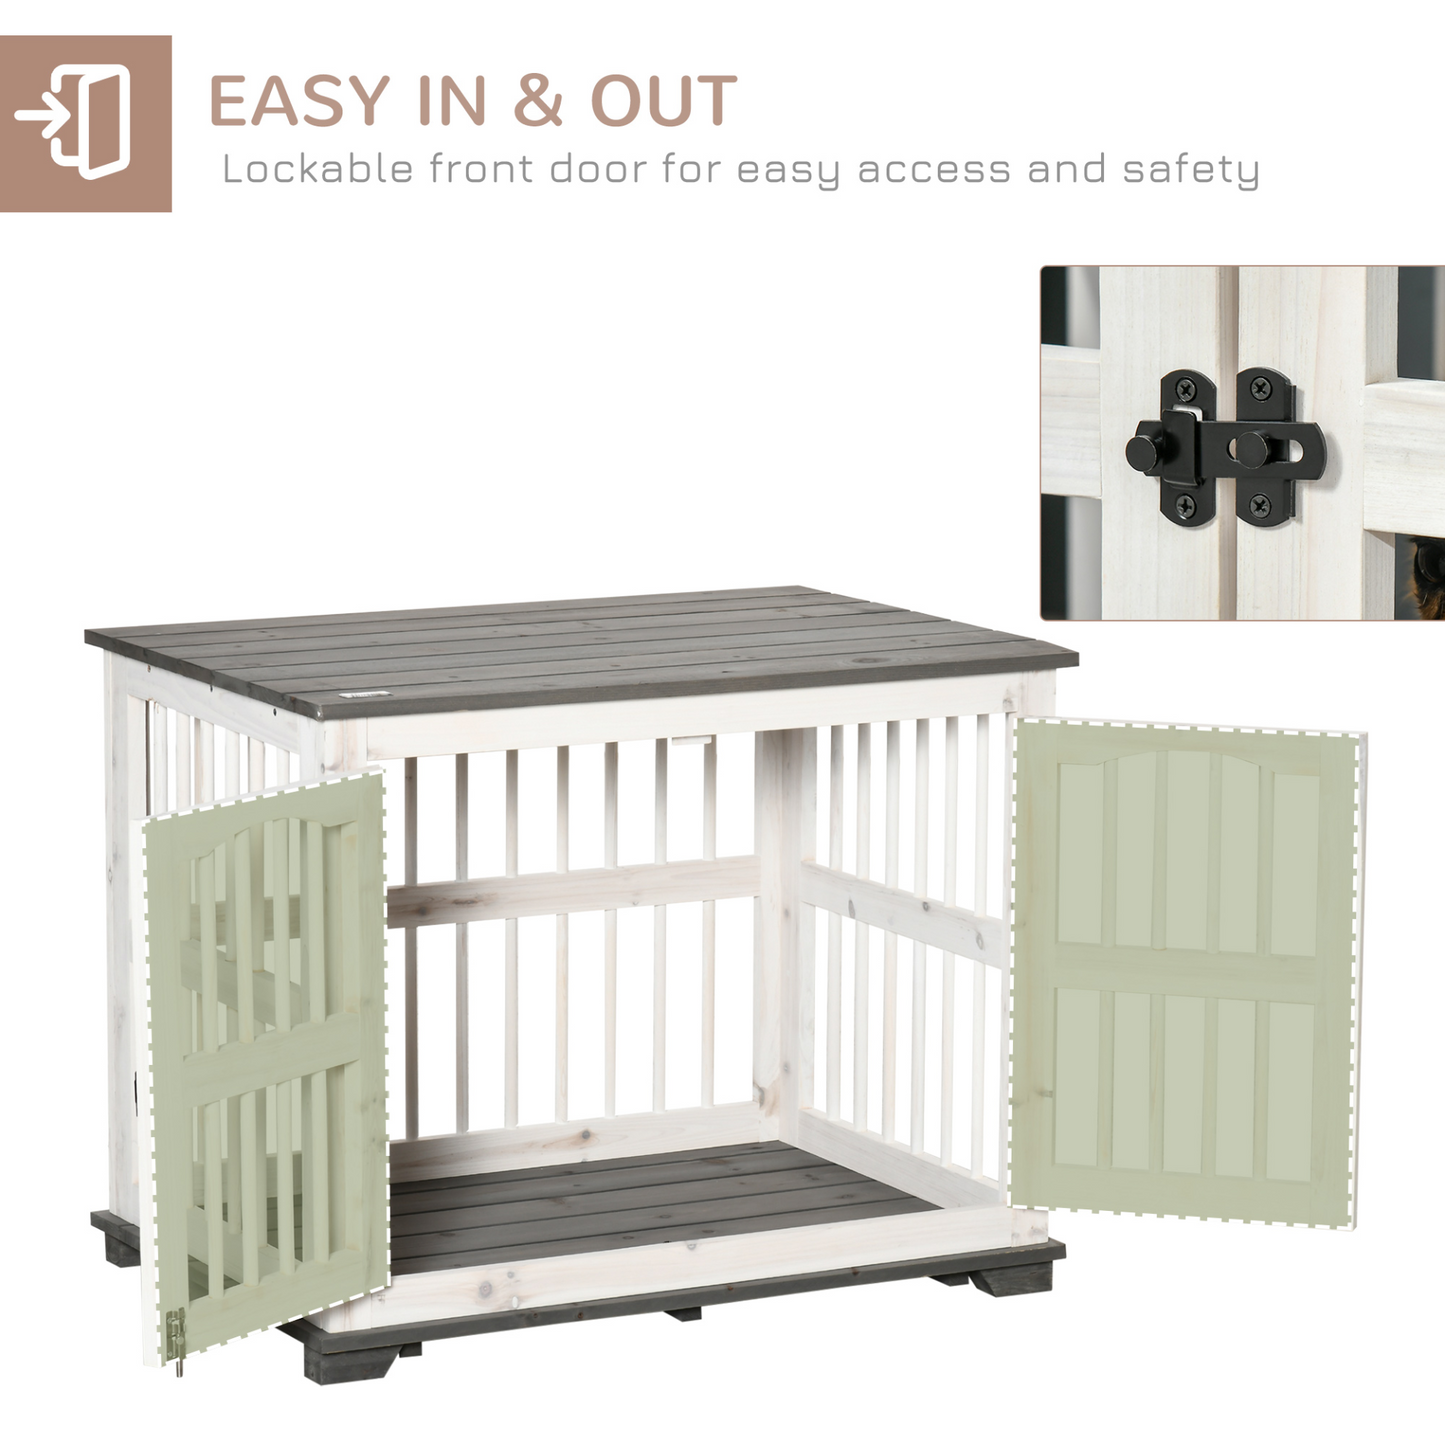 PawHut Wooden Dog Crate Furniture Pet Kennel Cage End Table for Small Medium Dogs, Indoor, White, 85.5 x 59.5 x 68 cm